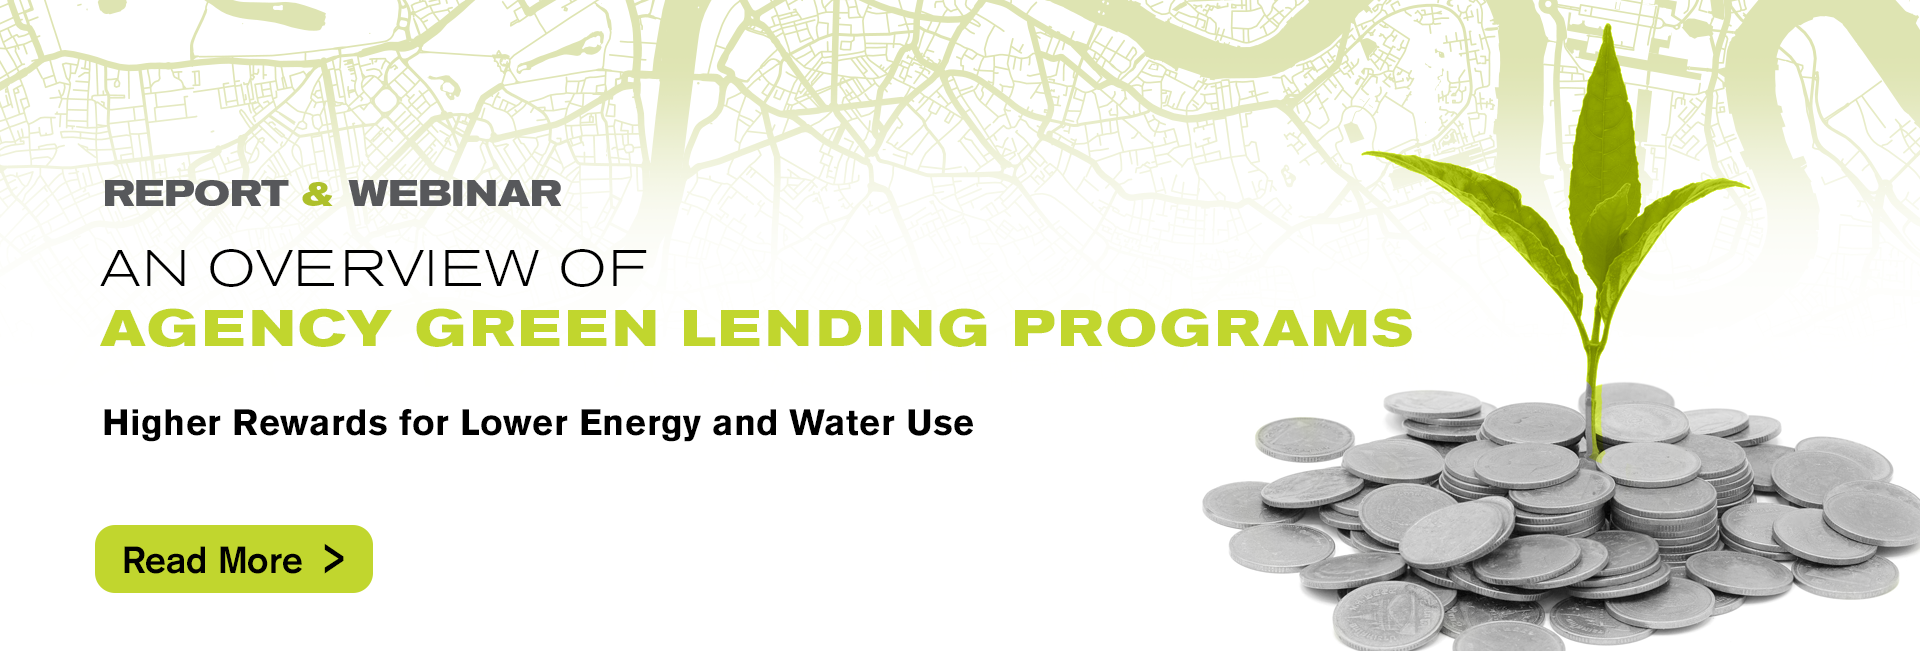 Report and Webinar An Overview of agency green lending programs text over Read more button